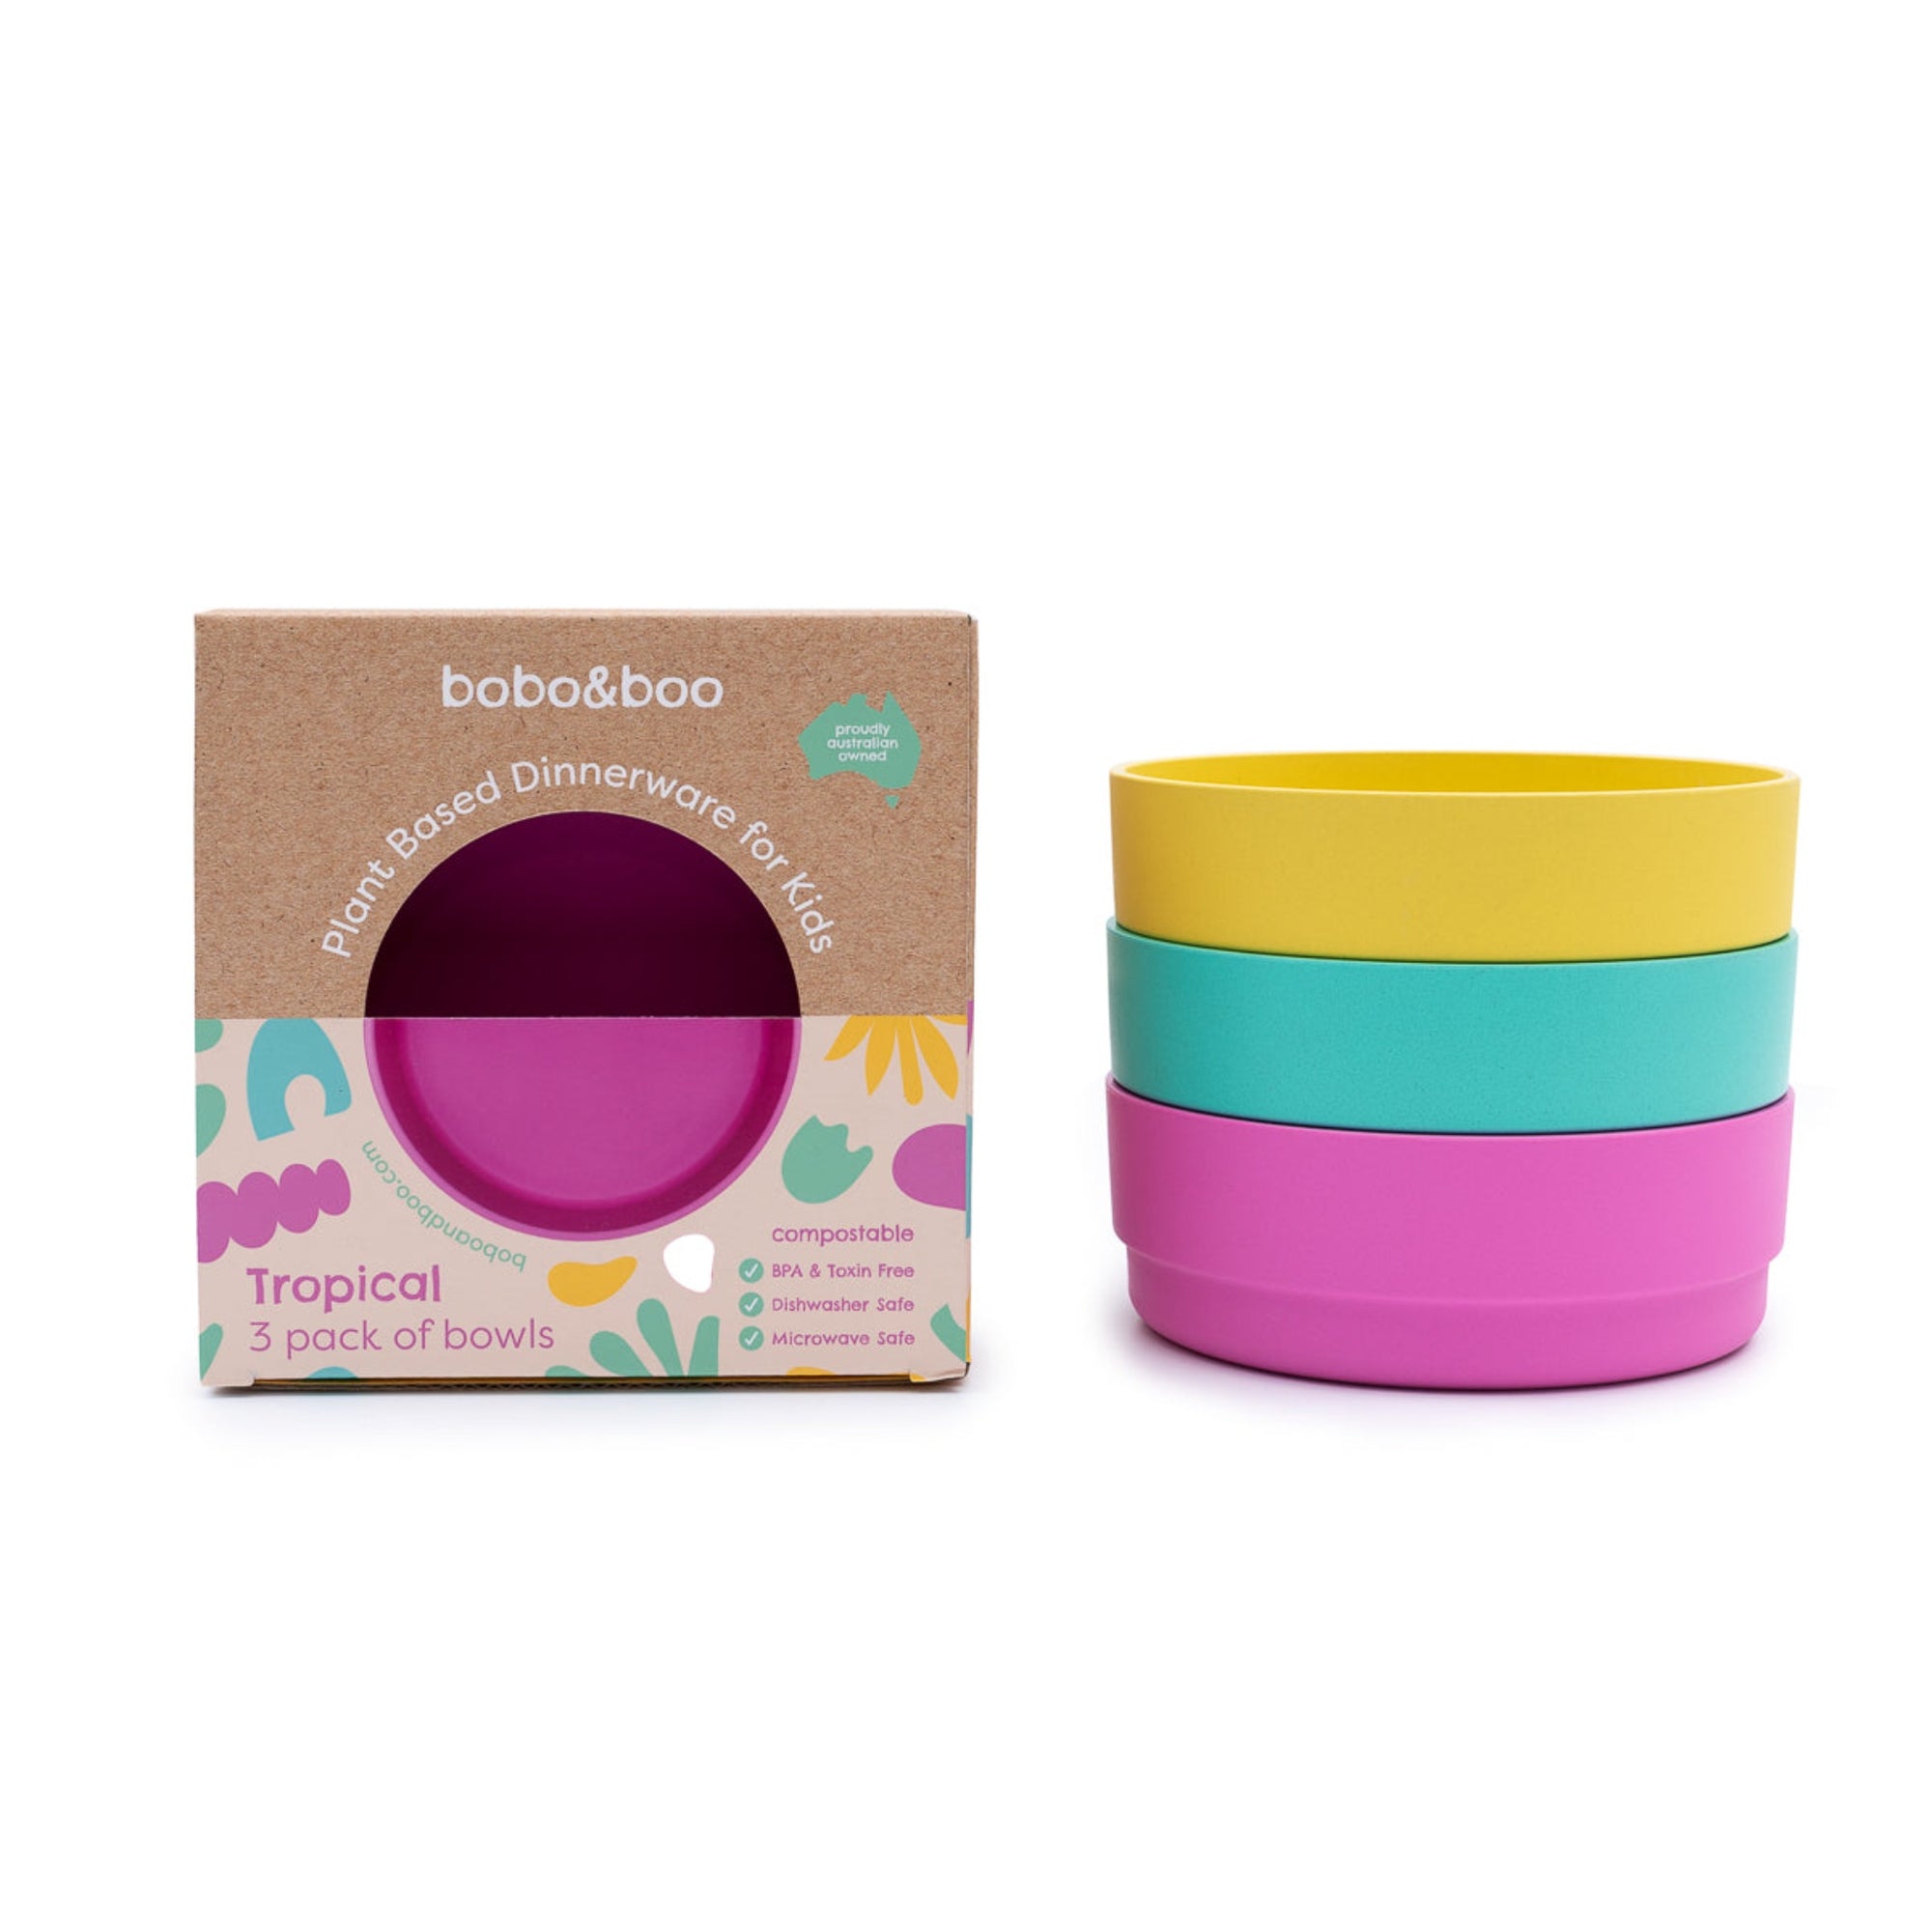 Bobo&Boo Bamboo Kids Snack Bowls, Set of 4 Bamboo Dishes, Non Toxic, Eco Friendly & Stackable Kids Snack Containers, Great Gift for Baby Showers, Birt